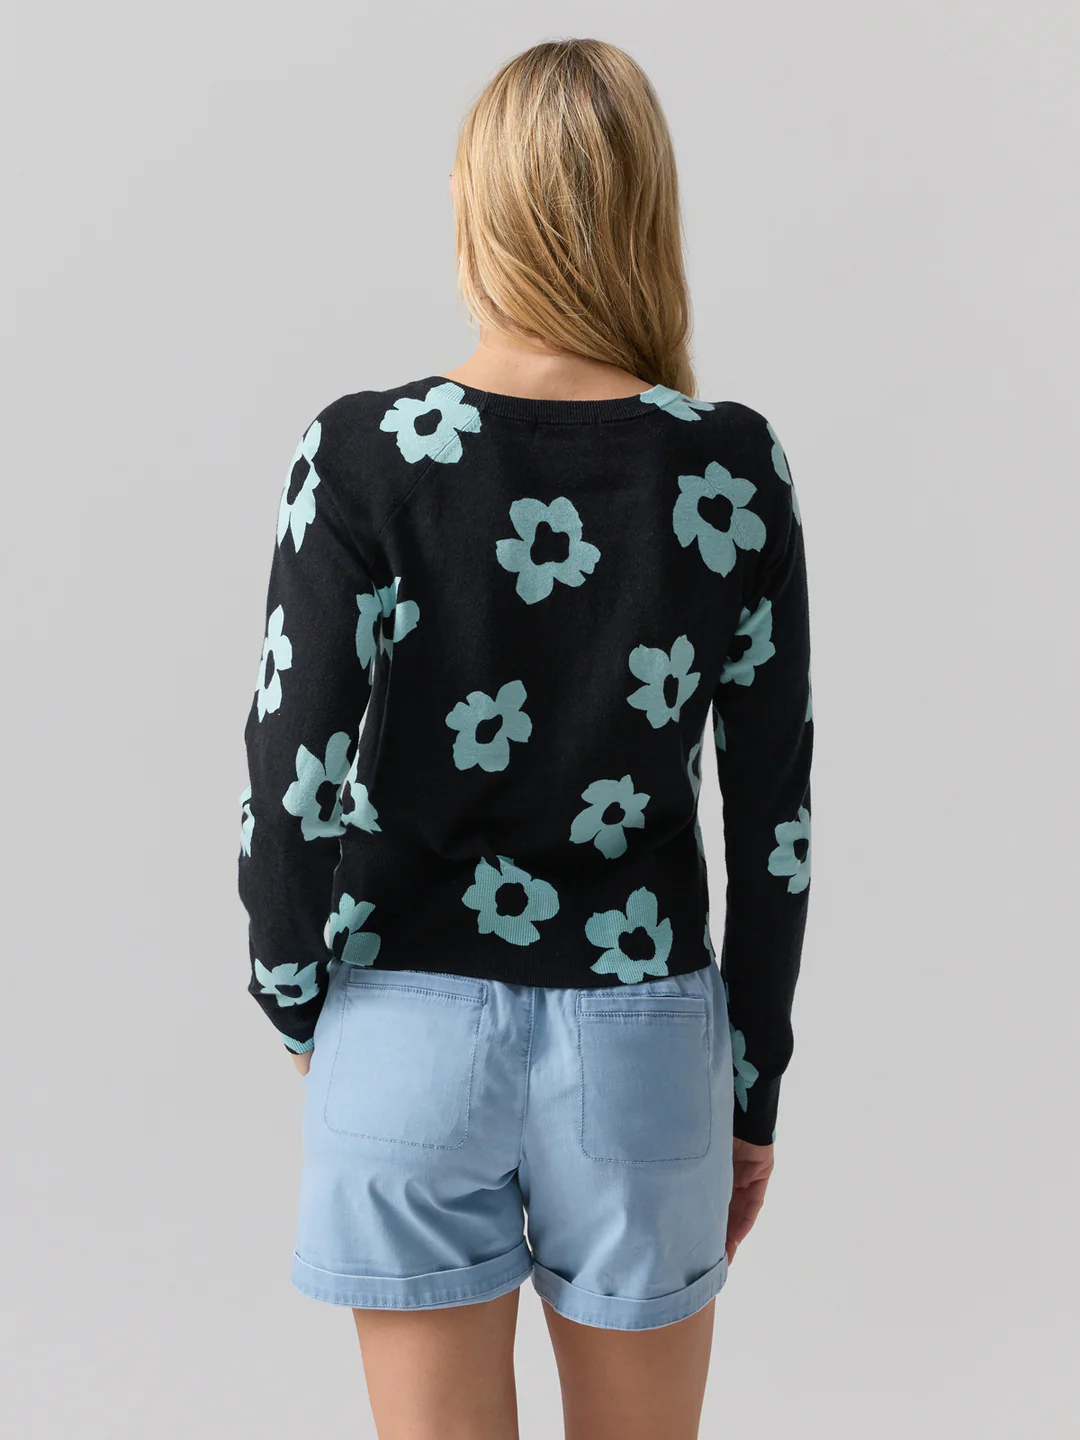 Sanctuary All Day Long Sweater - Aqua Flower Pop Clothing - Tops - Sweaters - Pullovers - Fine Gauge Pullovers by Sanctuary | Grace the Boutique